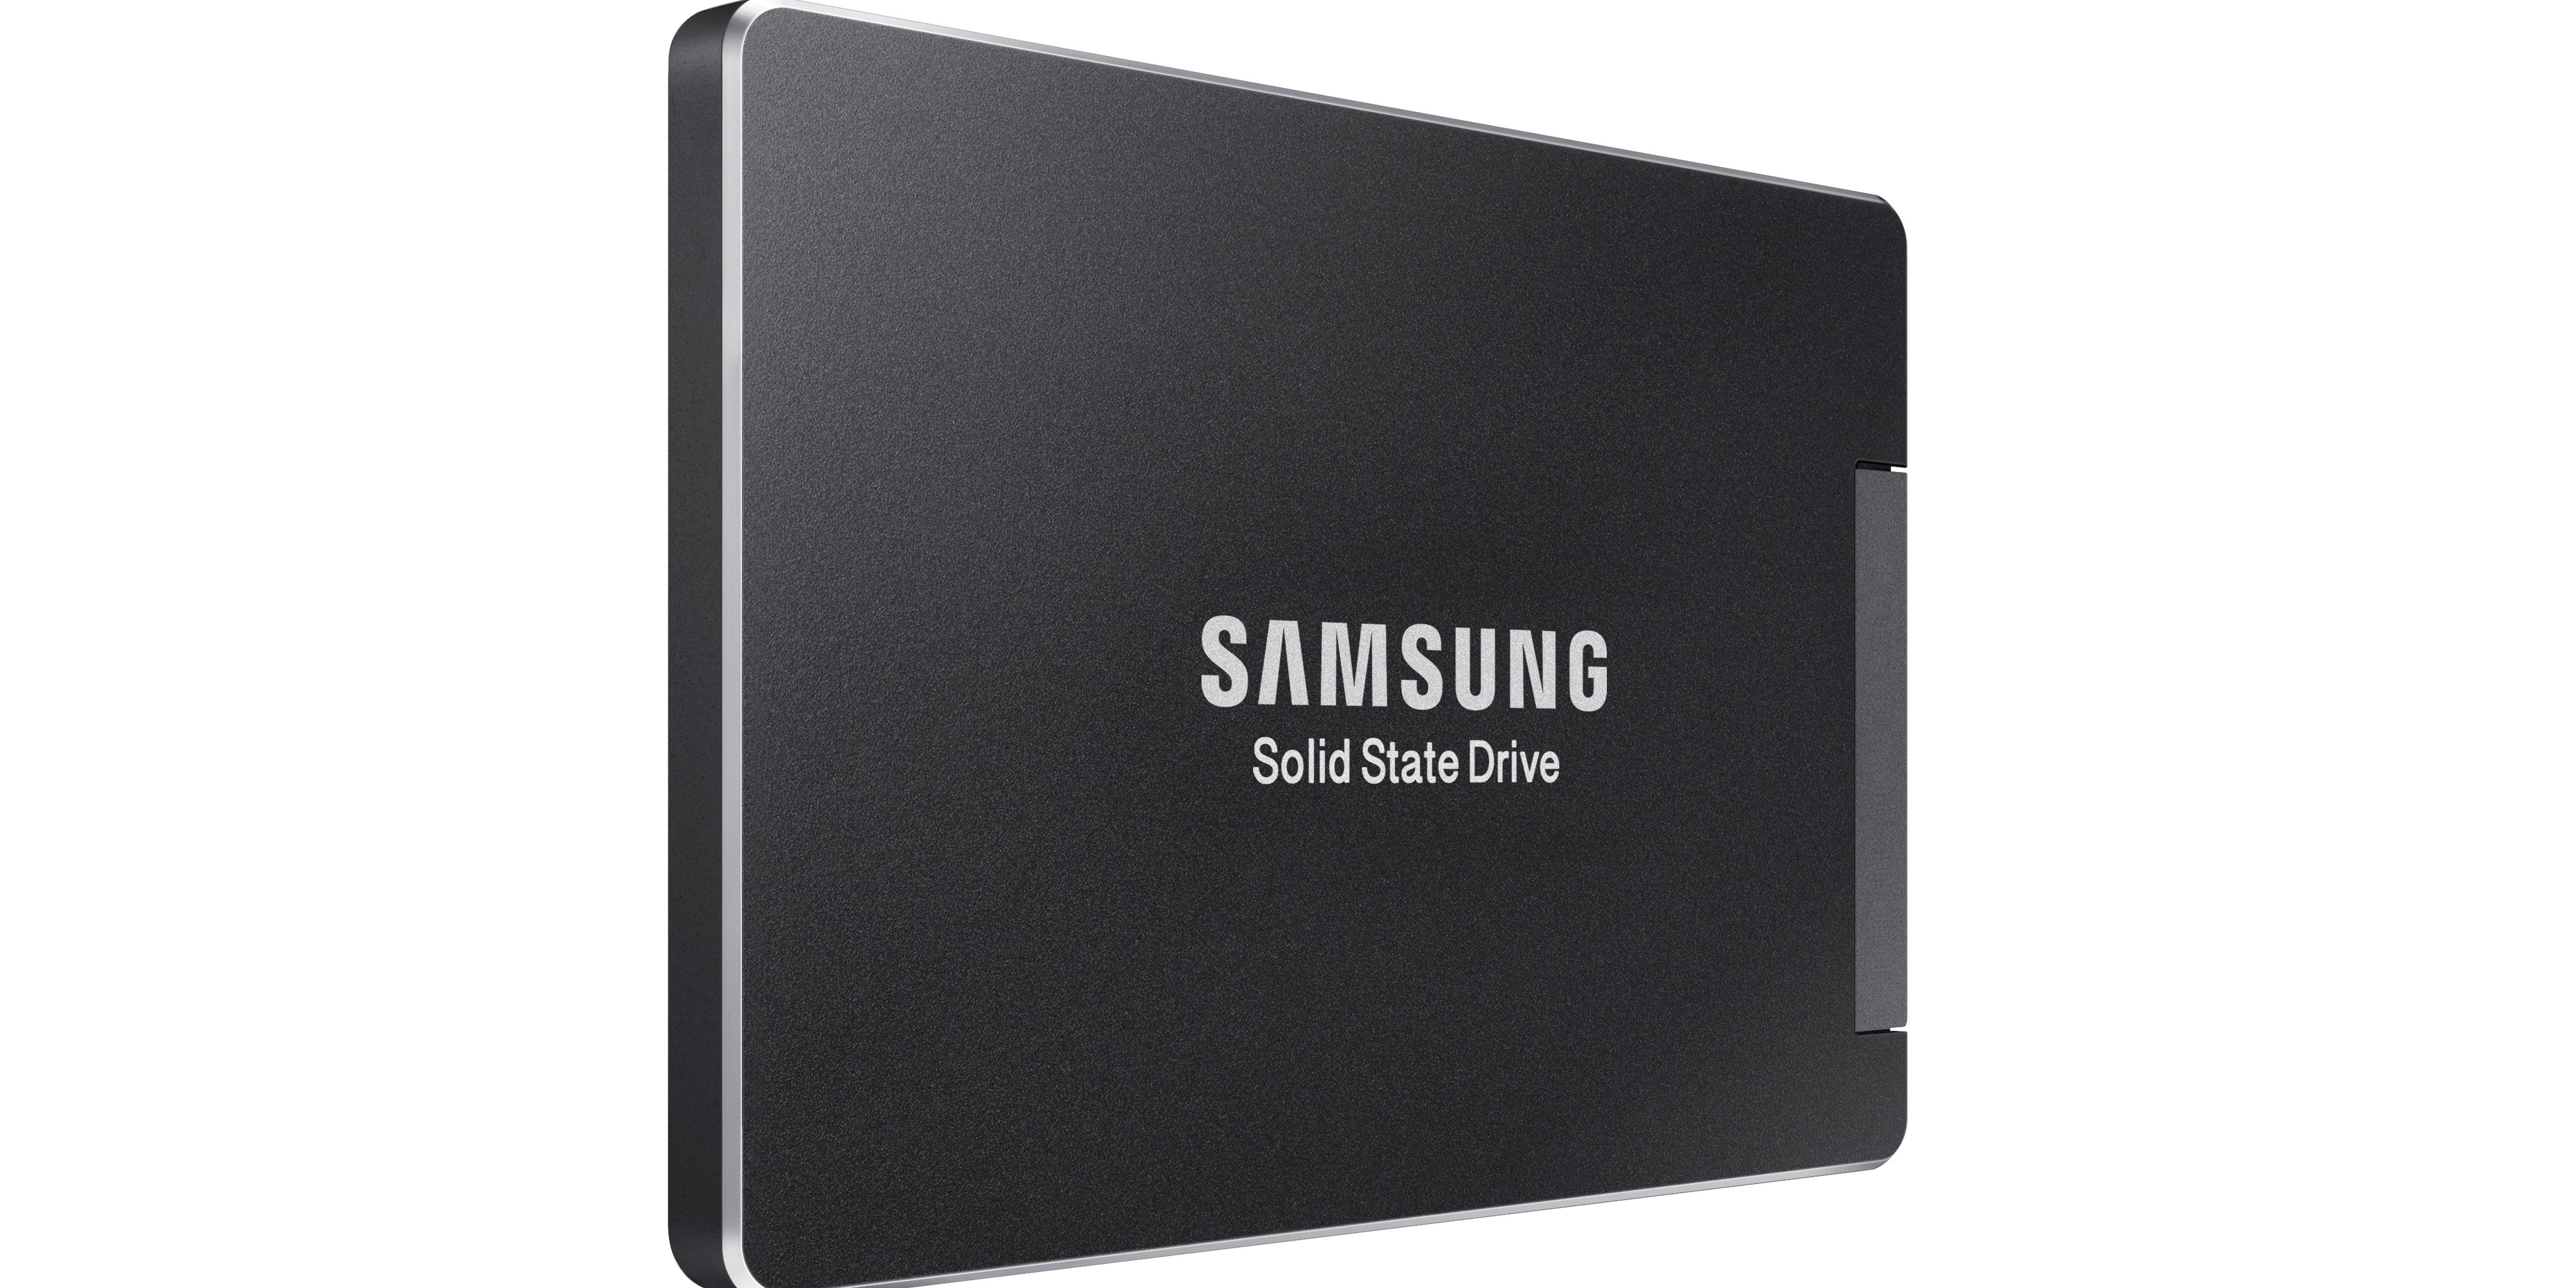 Samsung's new 16 TB SSD is the world's largest hard drive Market